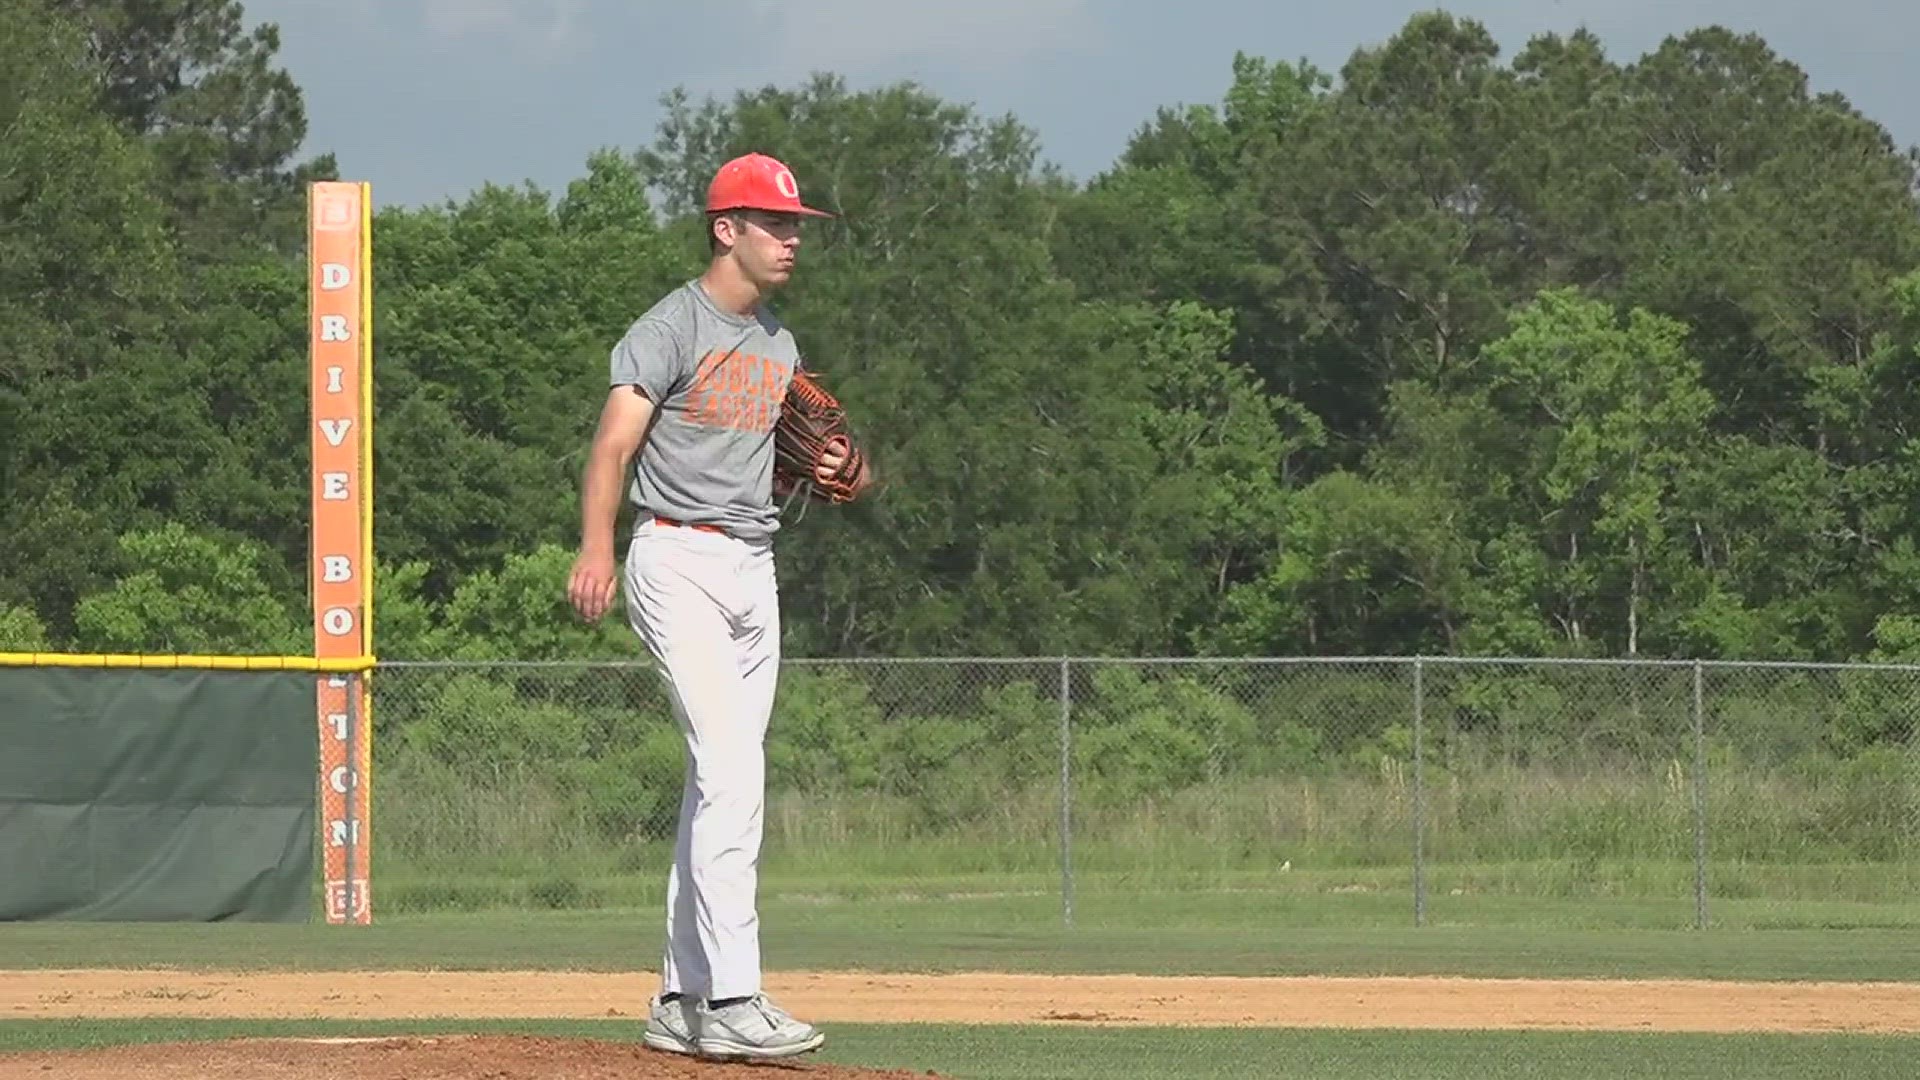 Jason Bodin is a Texas A&M commit whose hard work has made him Orangefield's ace.